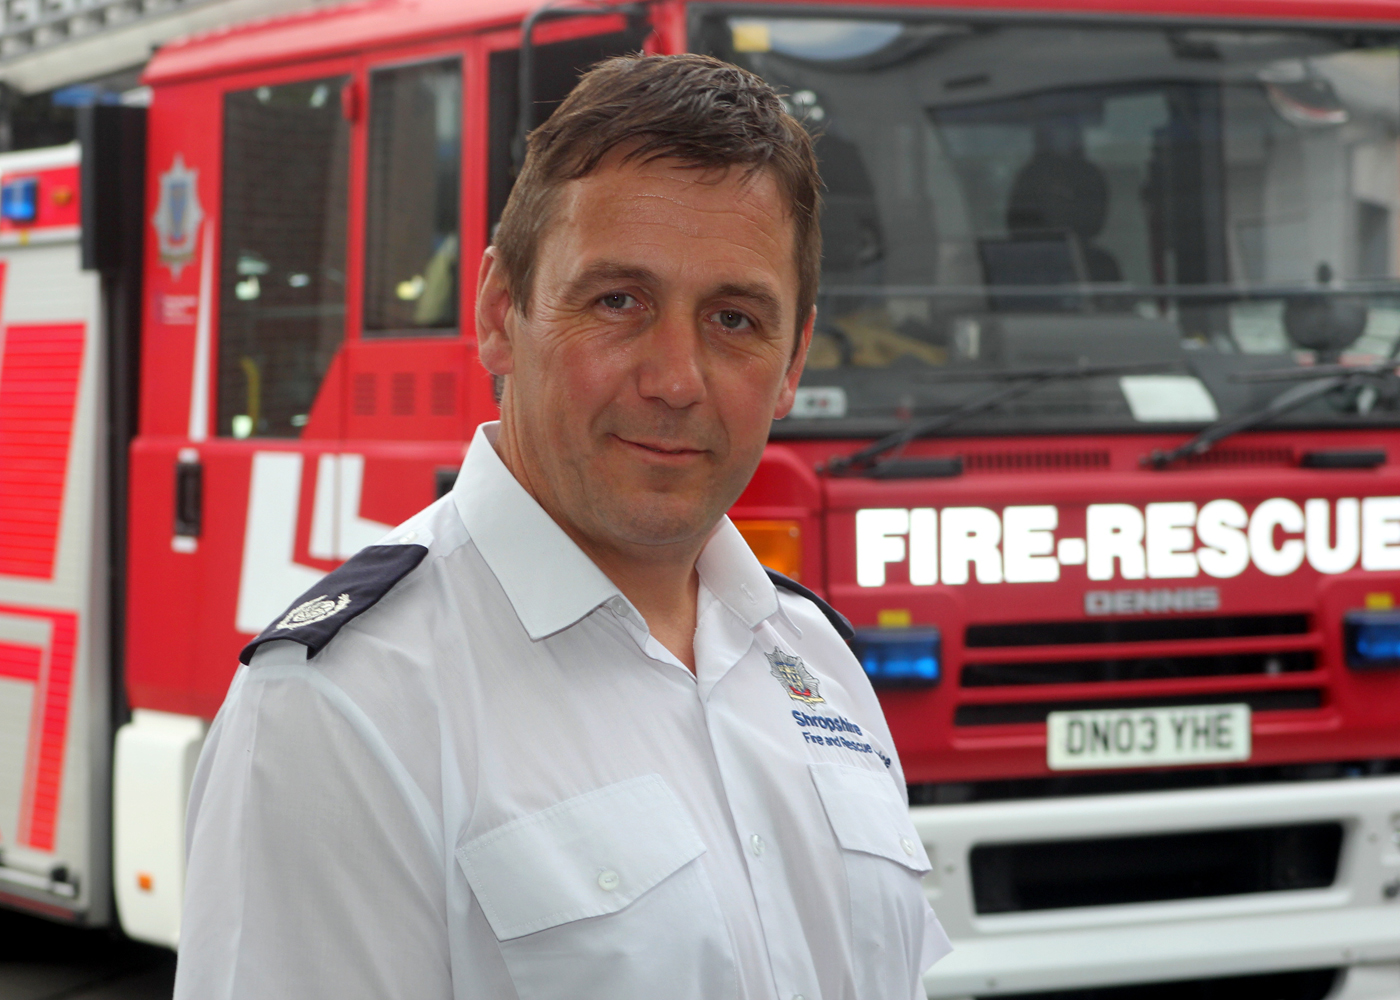 Group Commander Neil Griffiths who worked to set up Fes in Shropshire